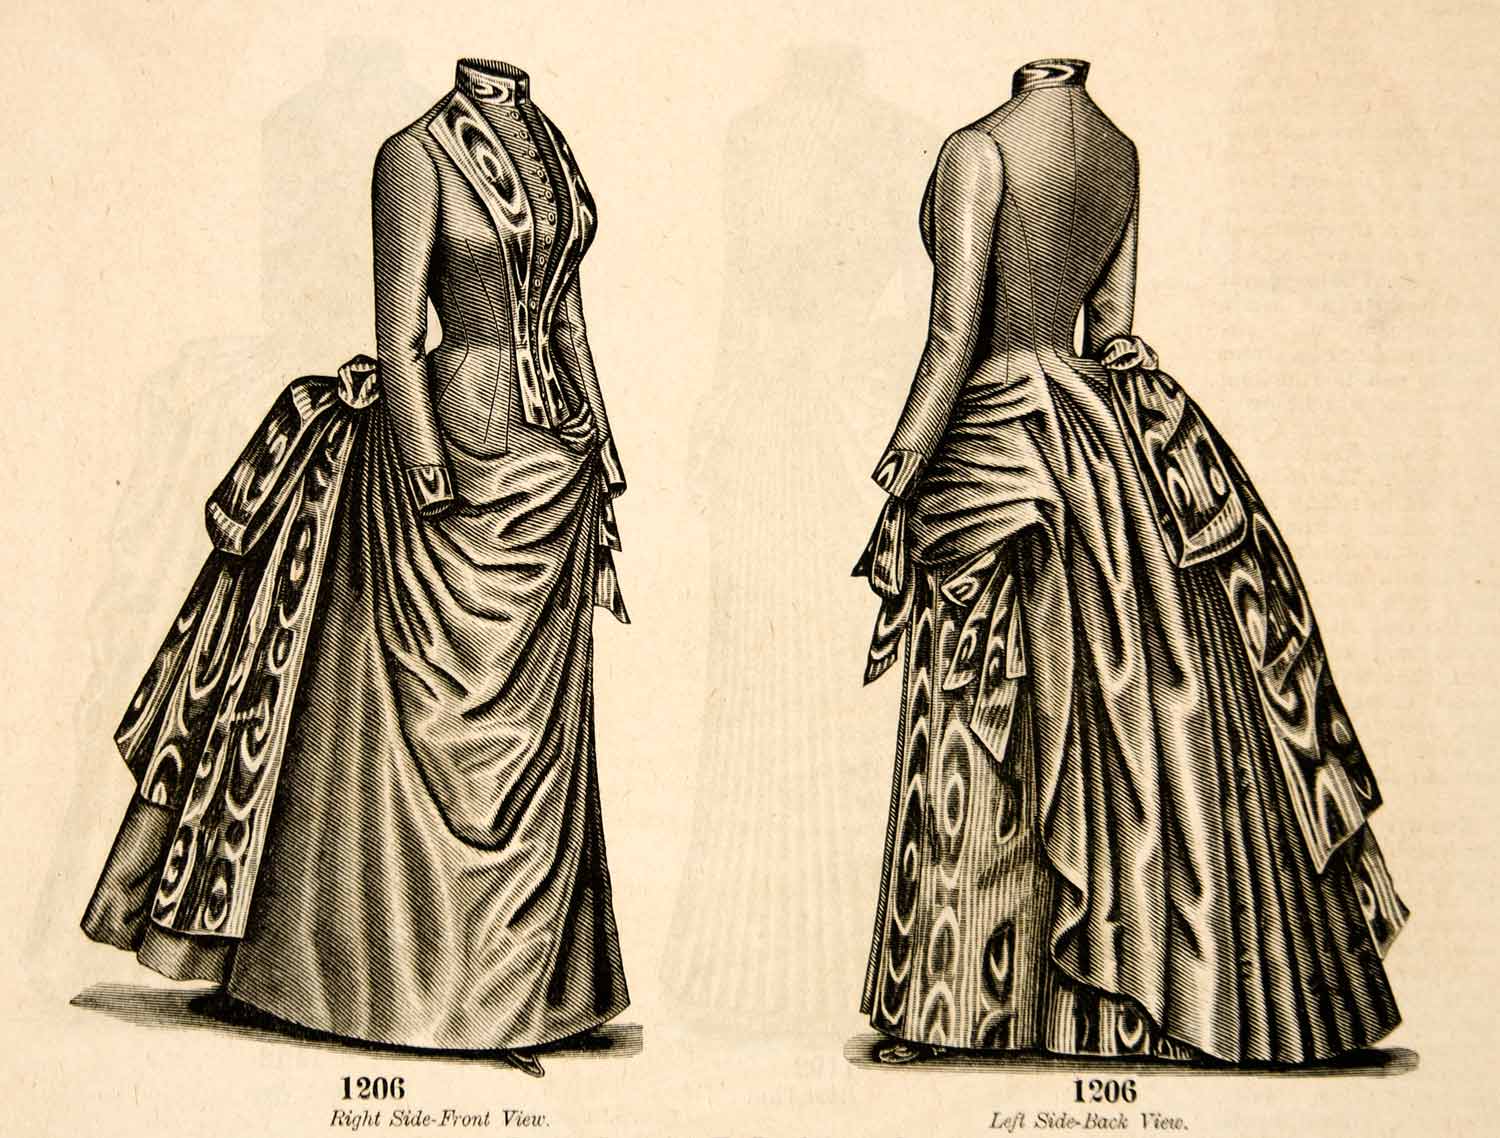 1886 Wood Engraving Victorian Woman Gown Clothing Costume Fashion Bustle YDL1